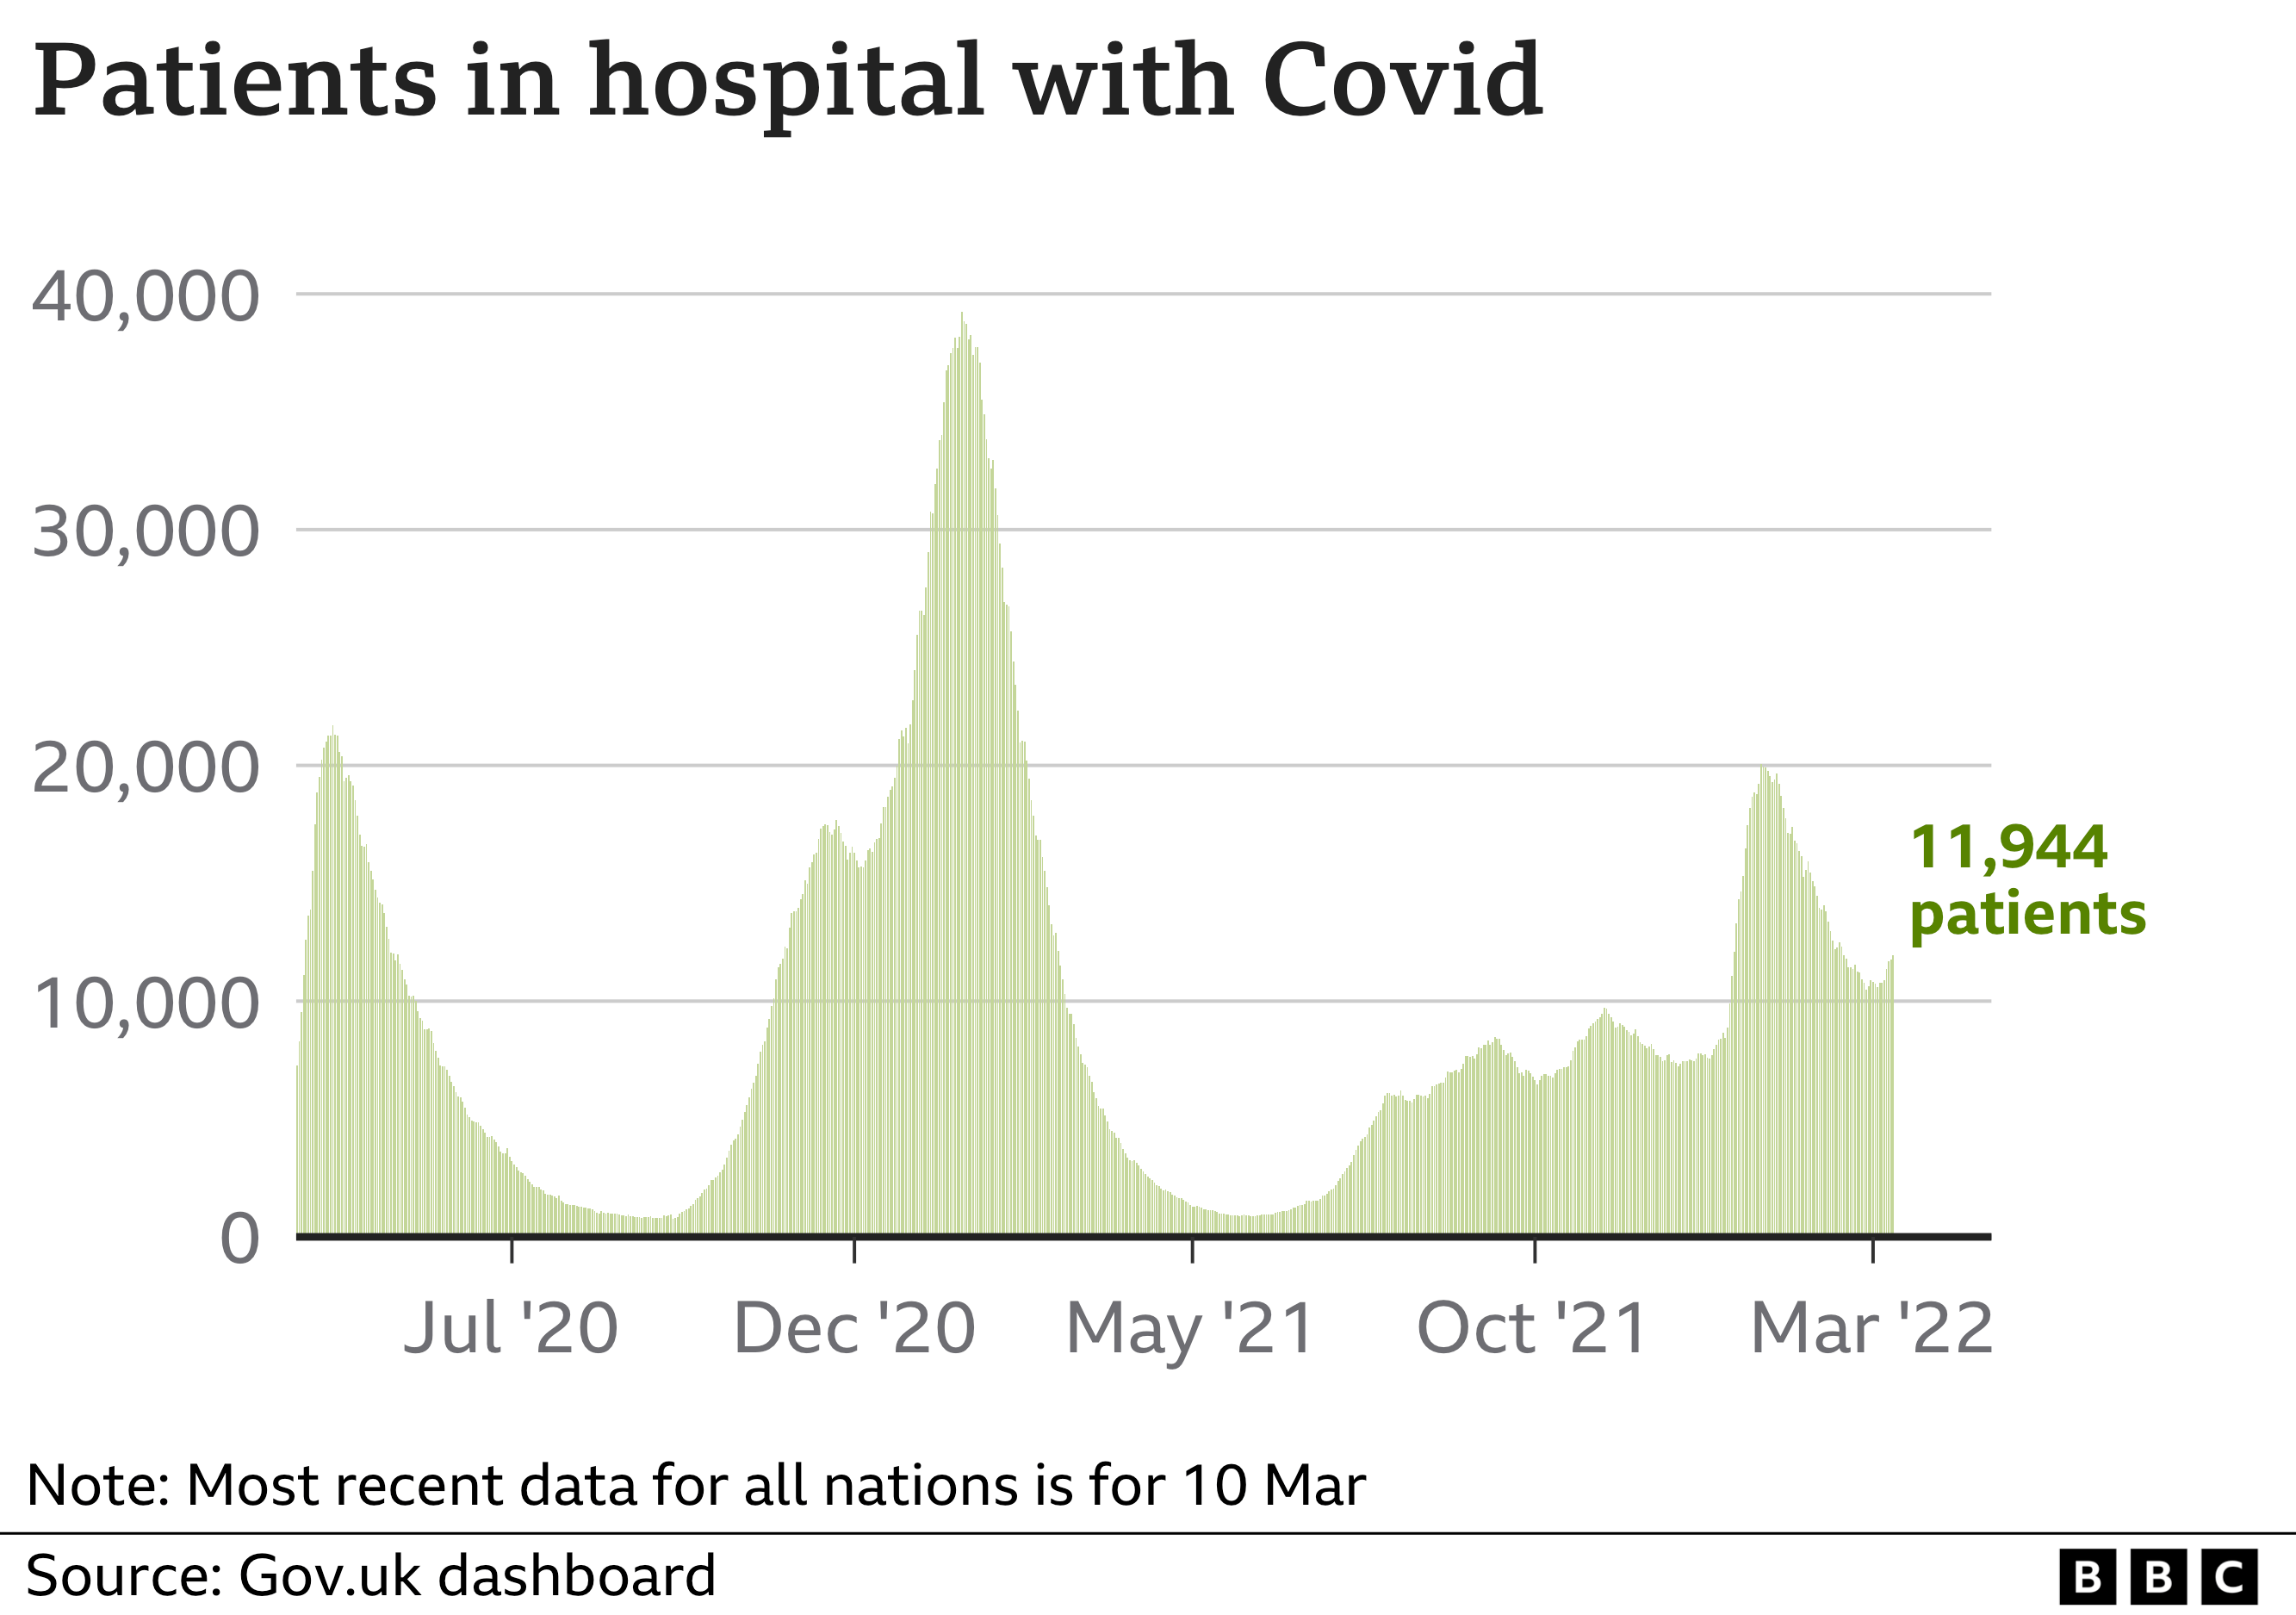 Chart showing the number of patients in hospital with Covid in the UK